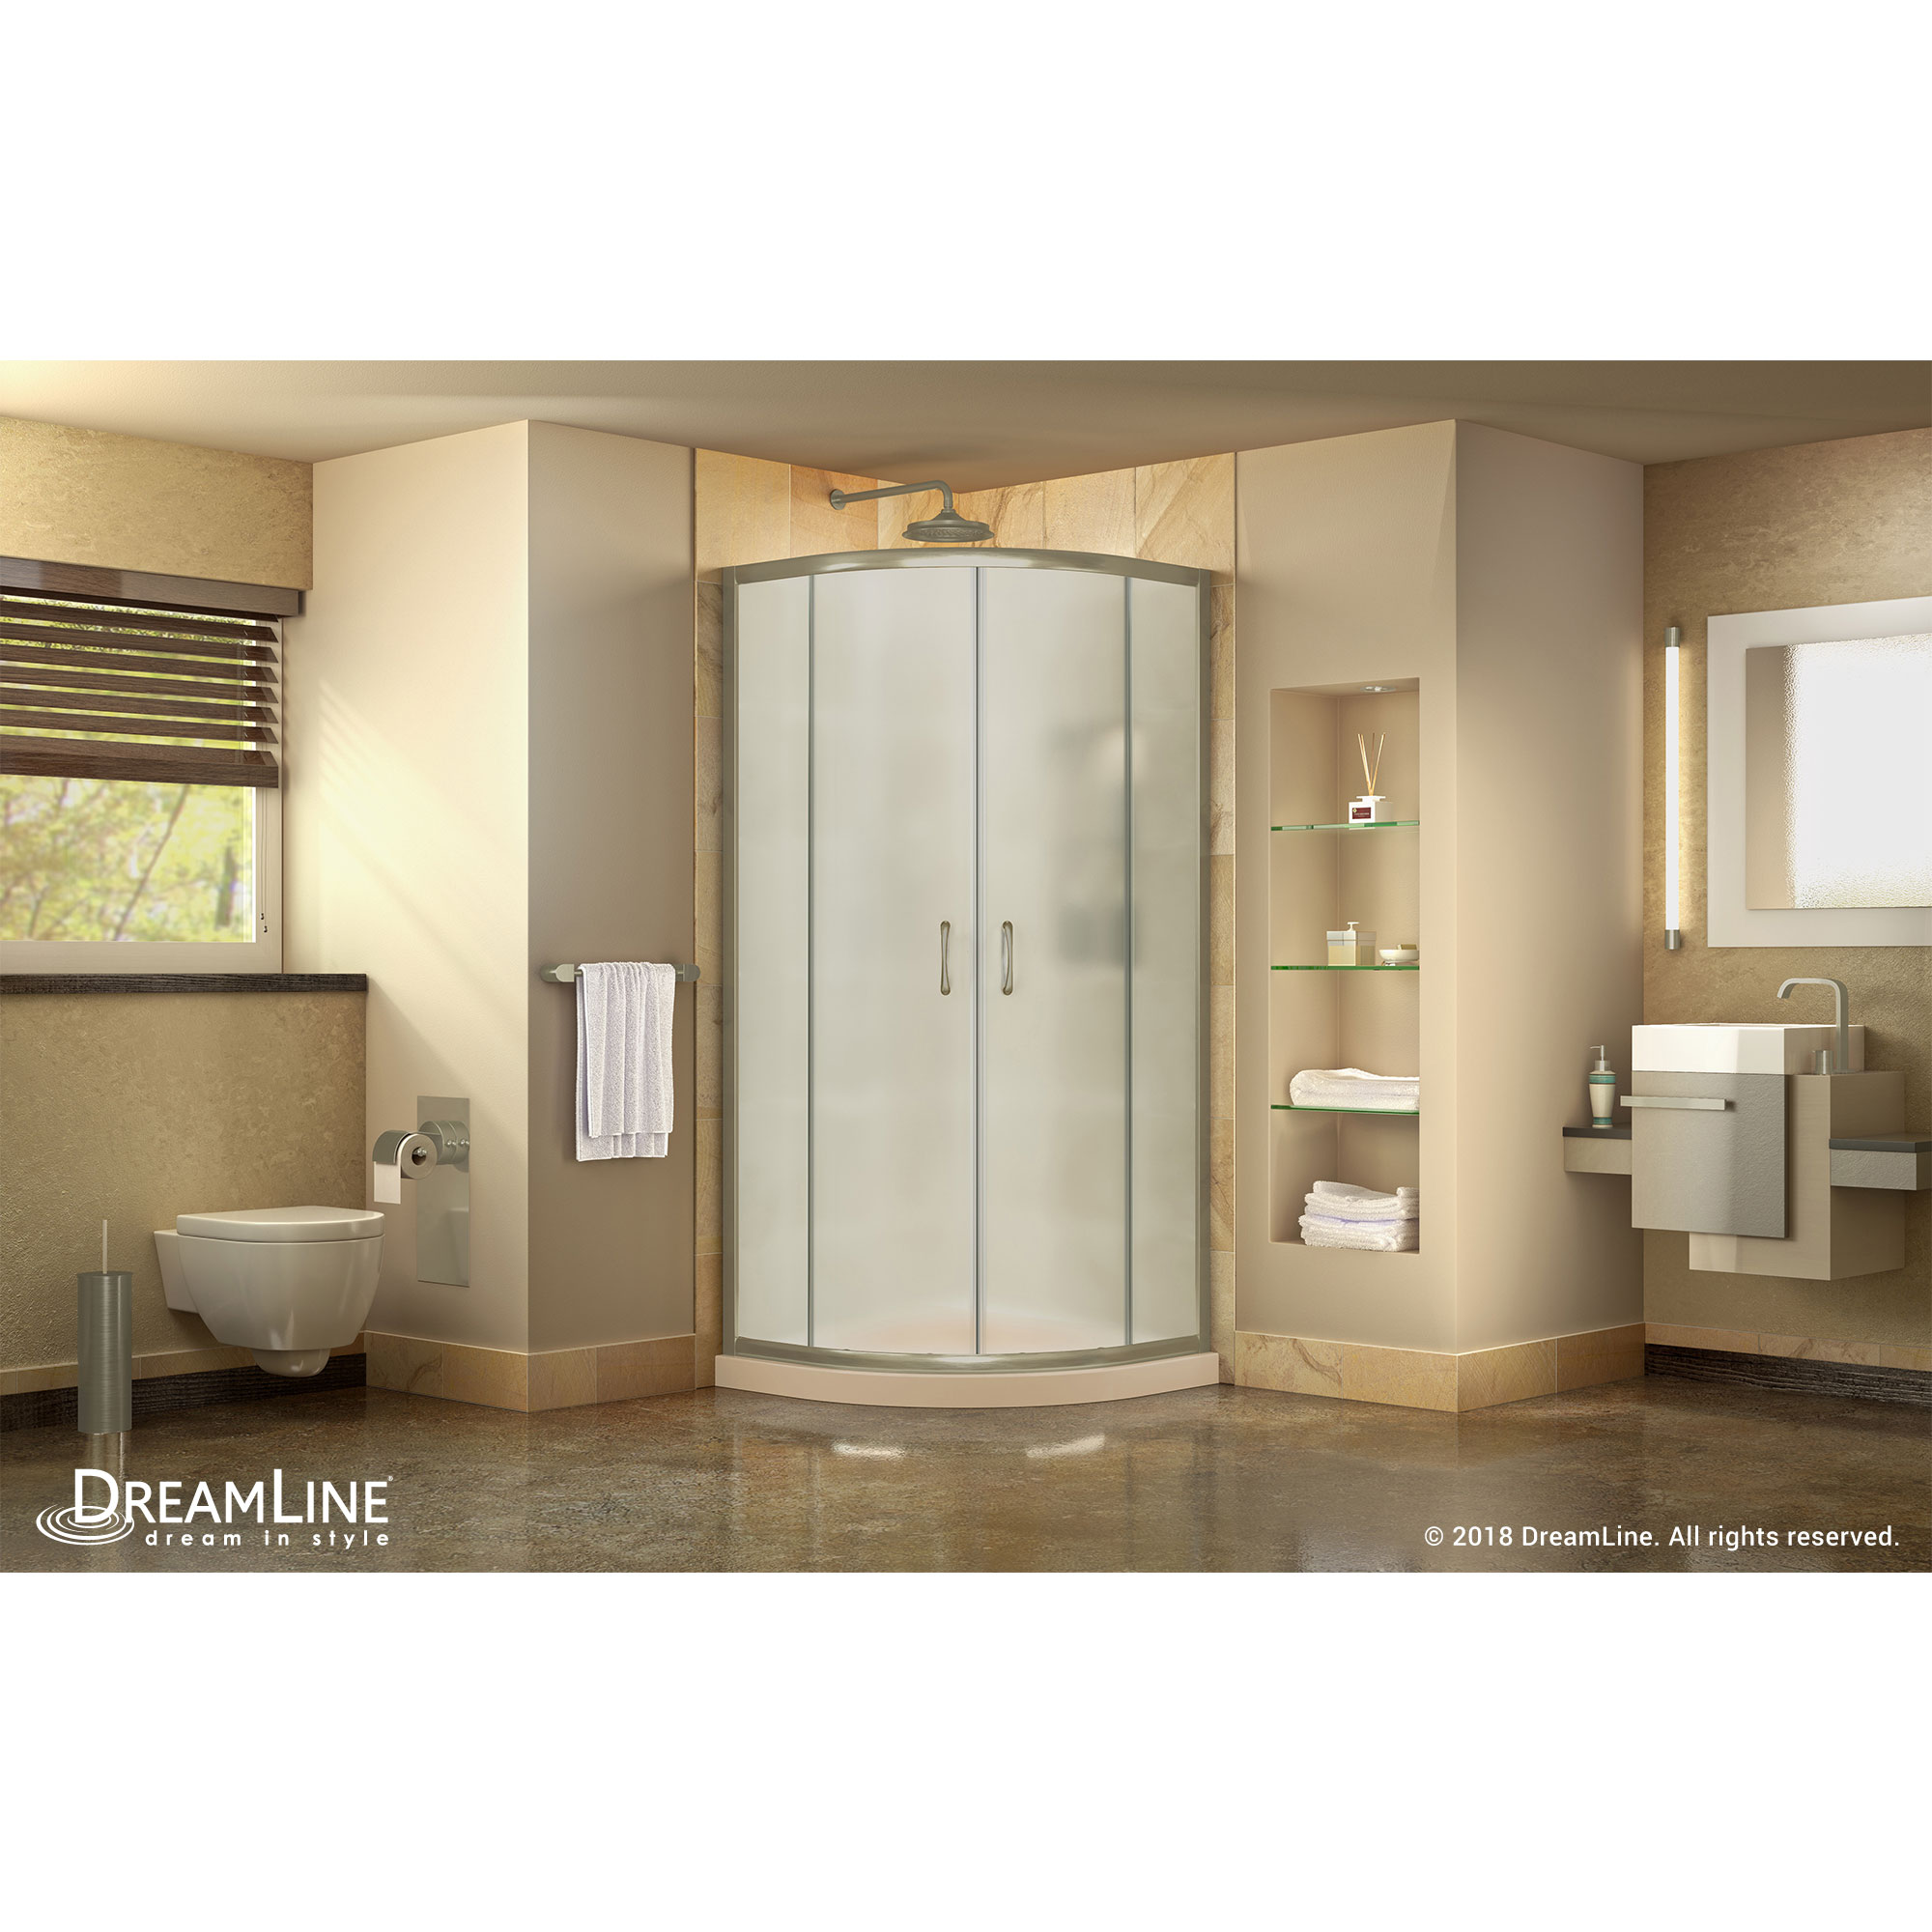 DreamLine Prime 33 in. x 74 3/4 in. Semi-Frameless Frosted Glass Sliding Shower Enclosure in Brushed Nickel with Biscuit Base Ki